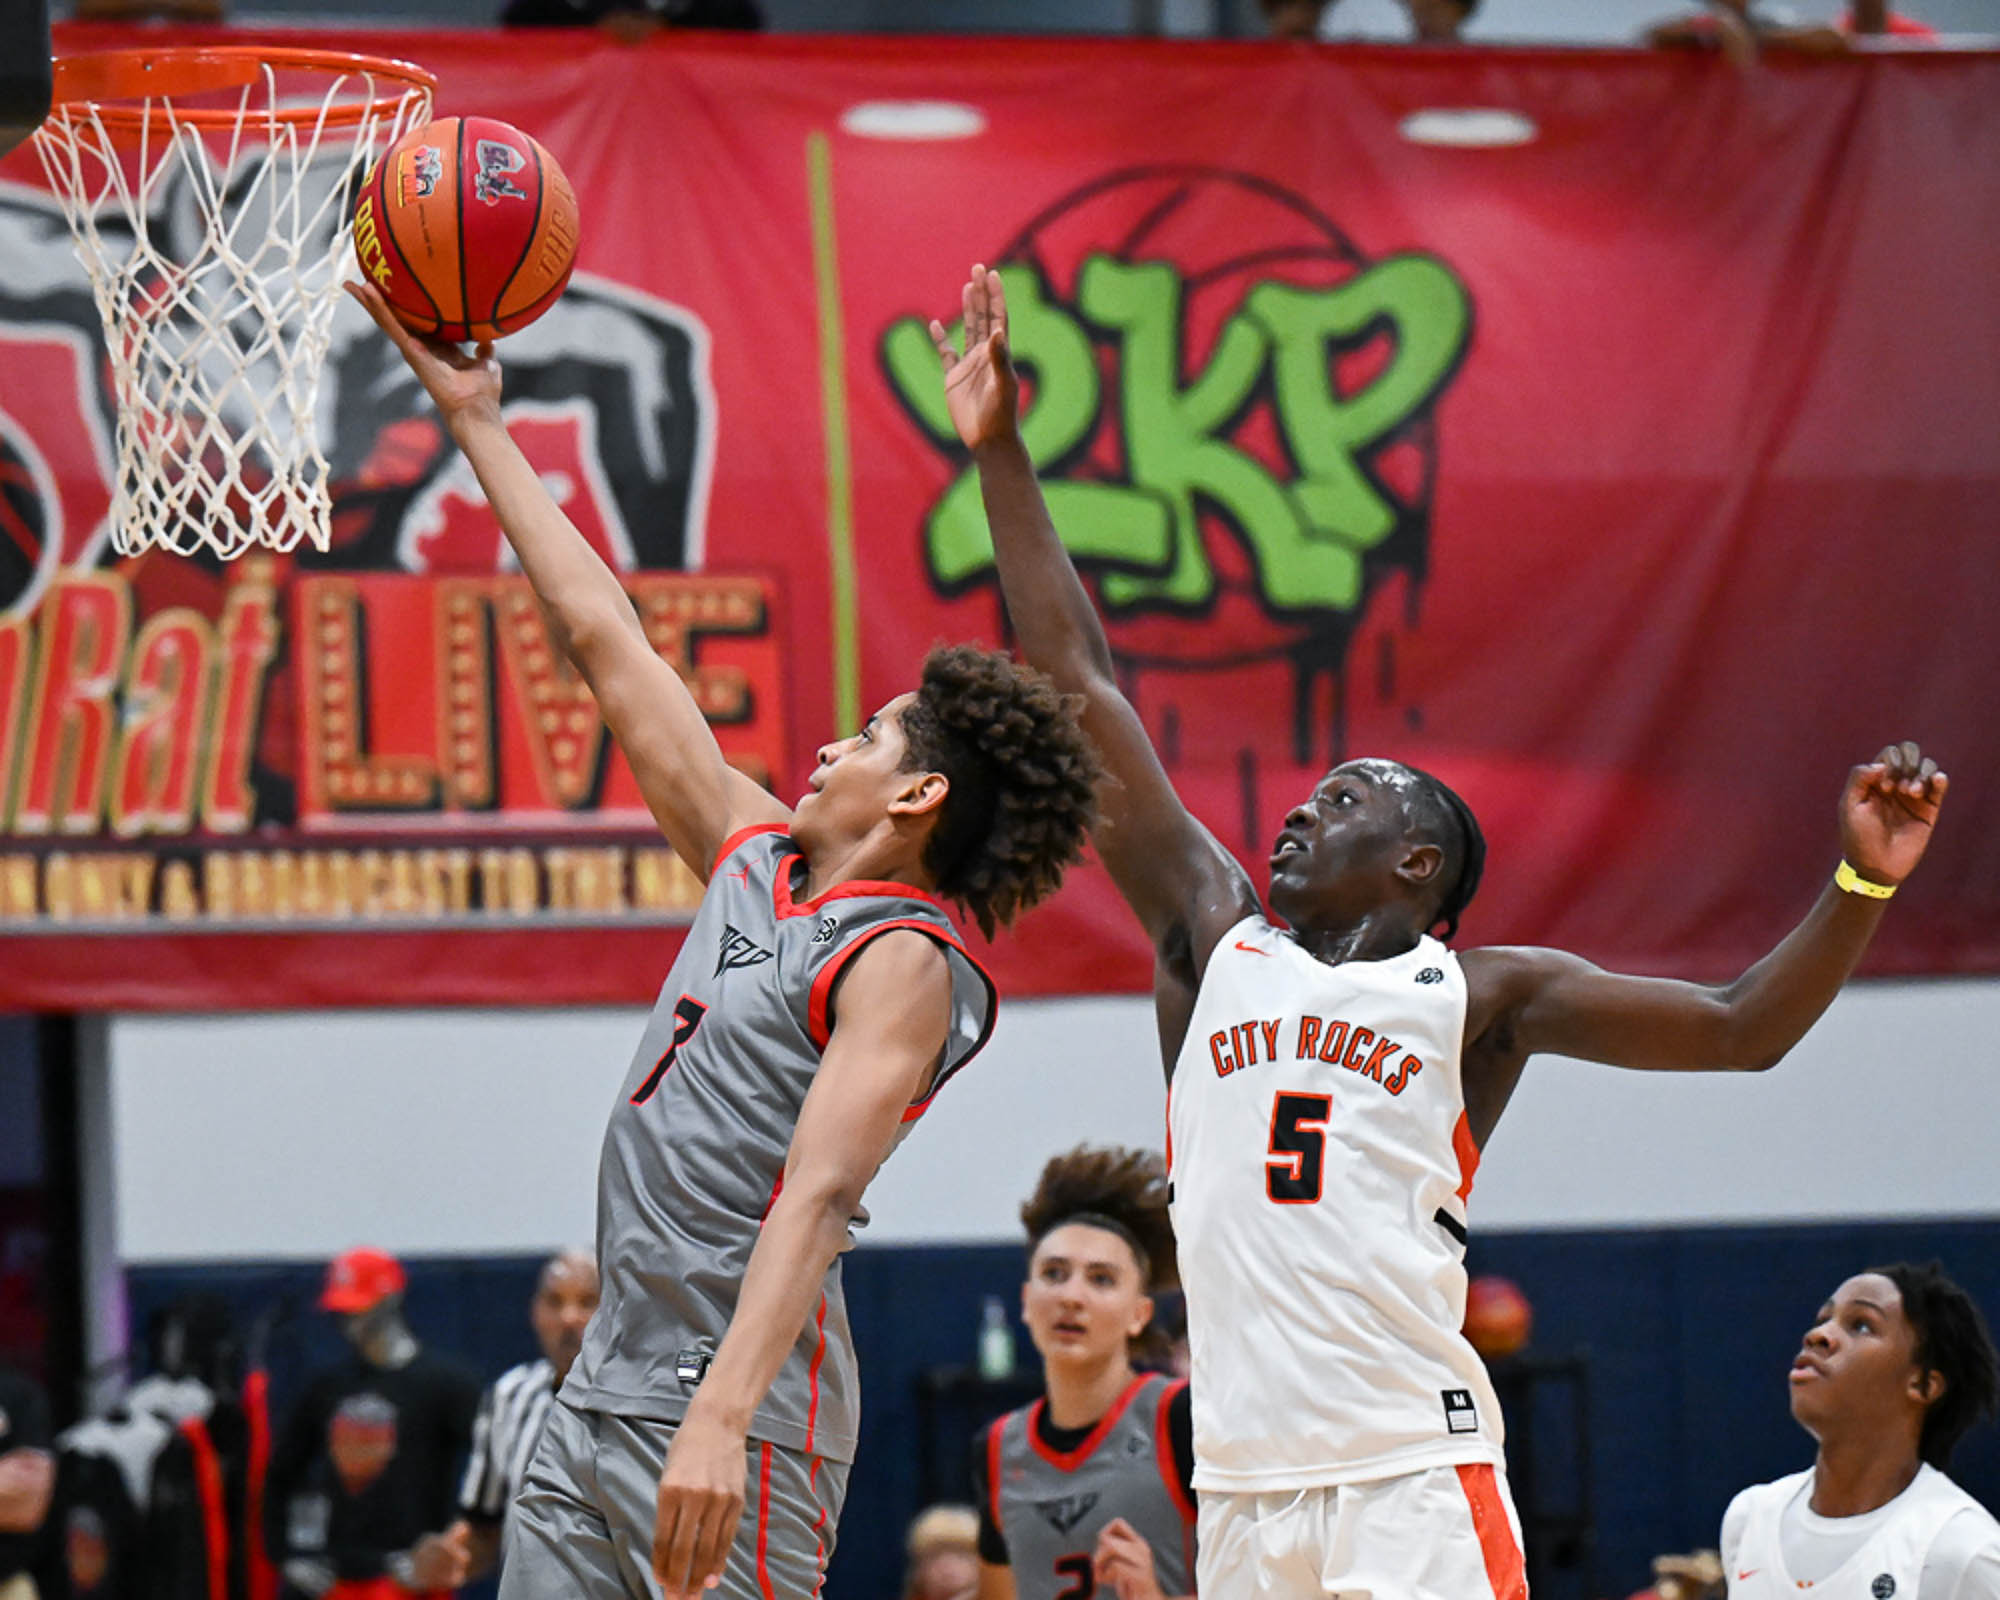 GymRat Live brings in top-tier boys basketball players